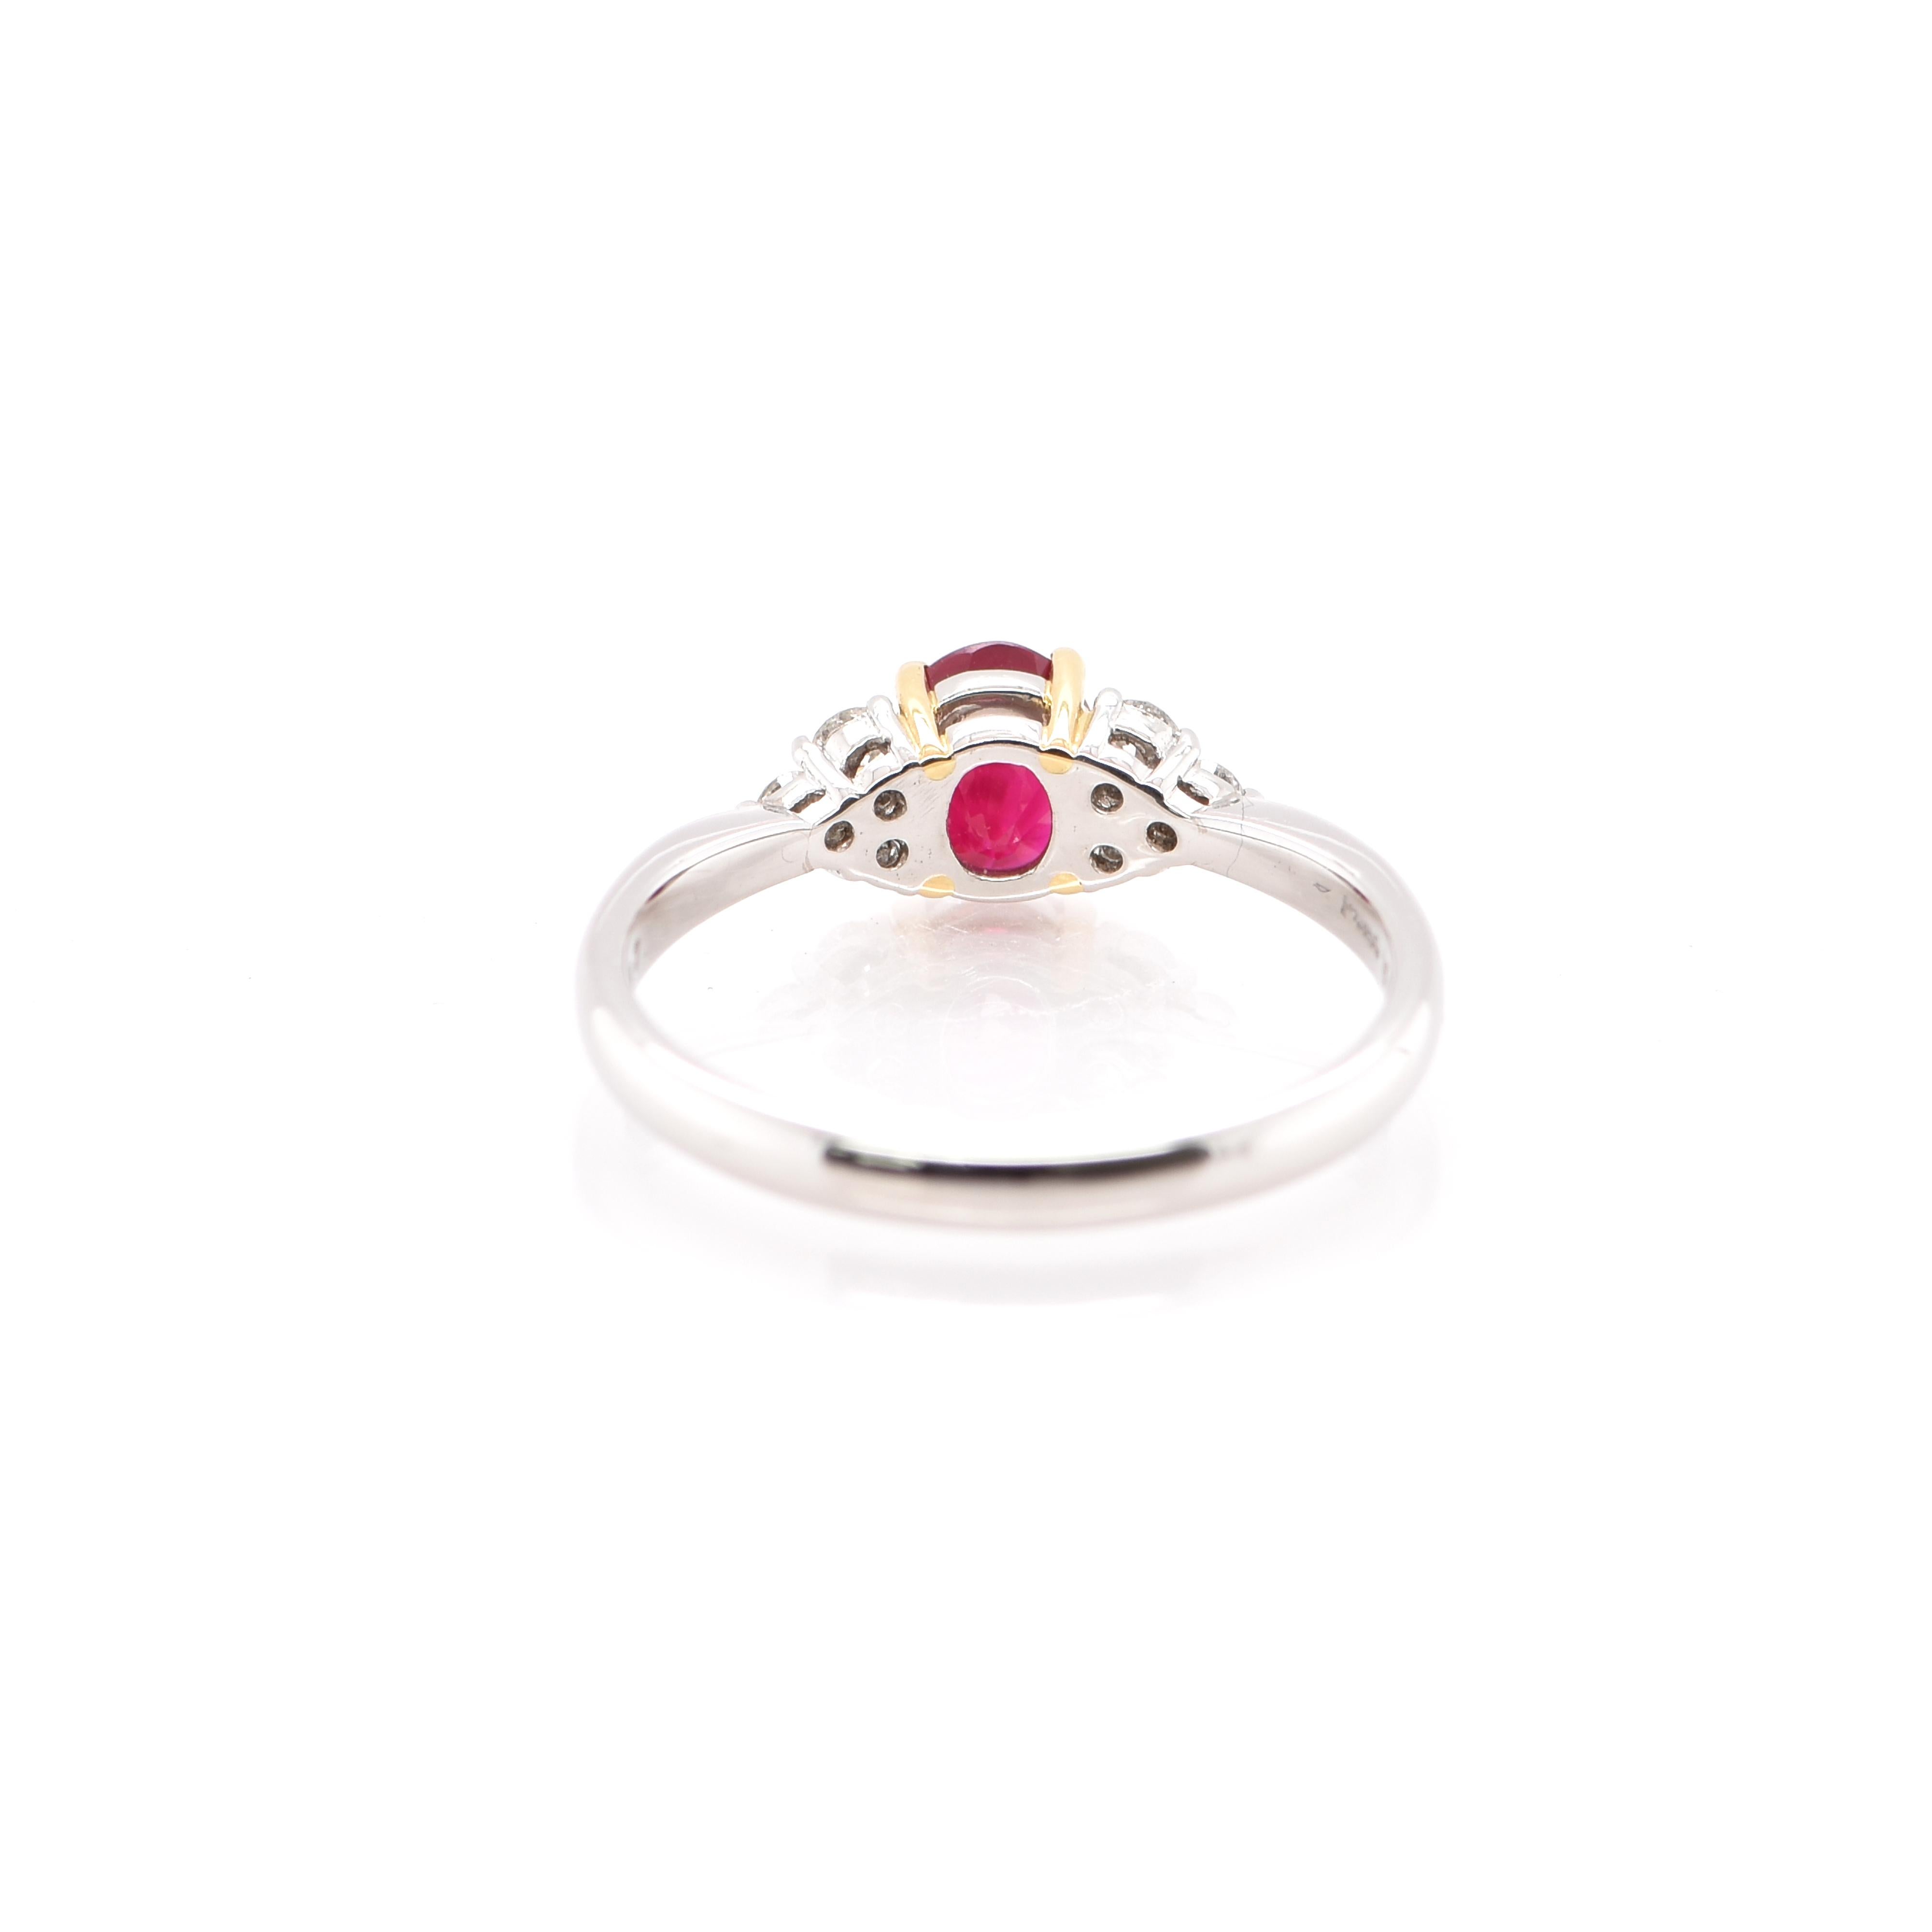 A beautiful Engagement Ring featuring a 0.99 Carat Ruby and 0.17 Carats of Diamond Accents set in Platinum and 18K Gold Prongs. Rubies are referred to as 